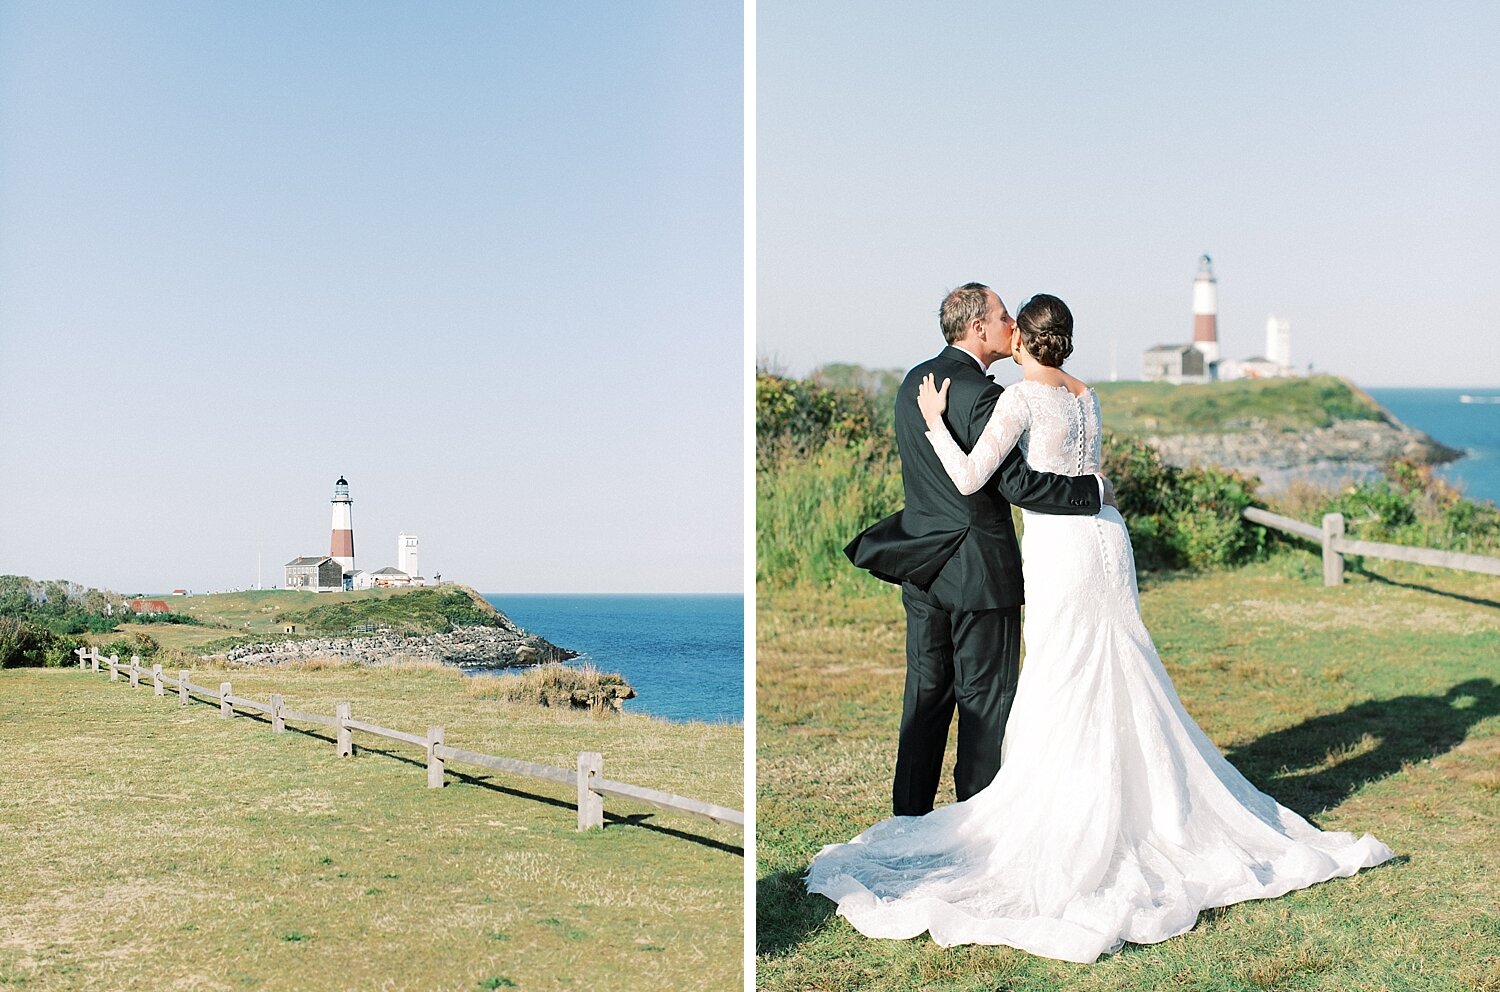 Montauk wedding day photographed by Asher Gardner Photography